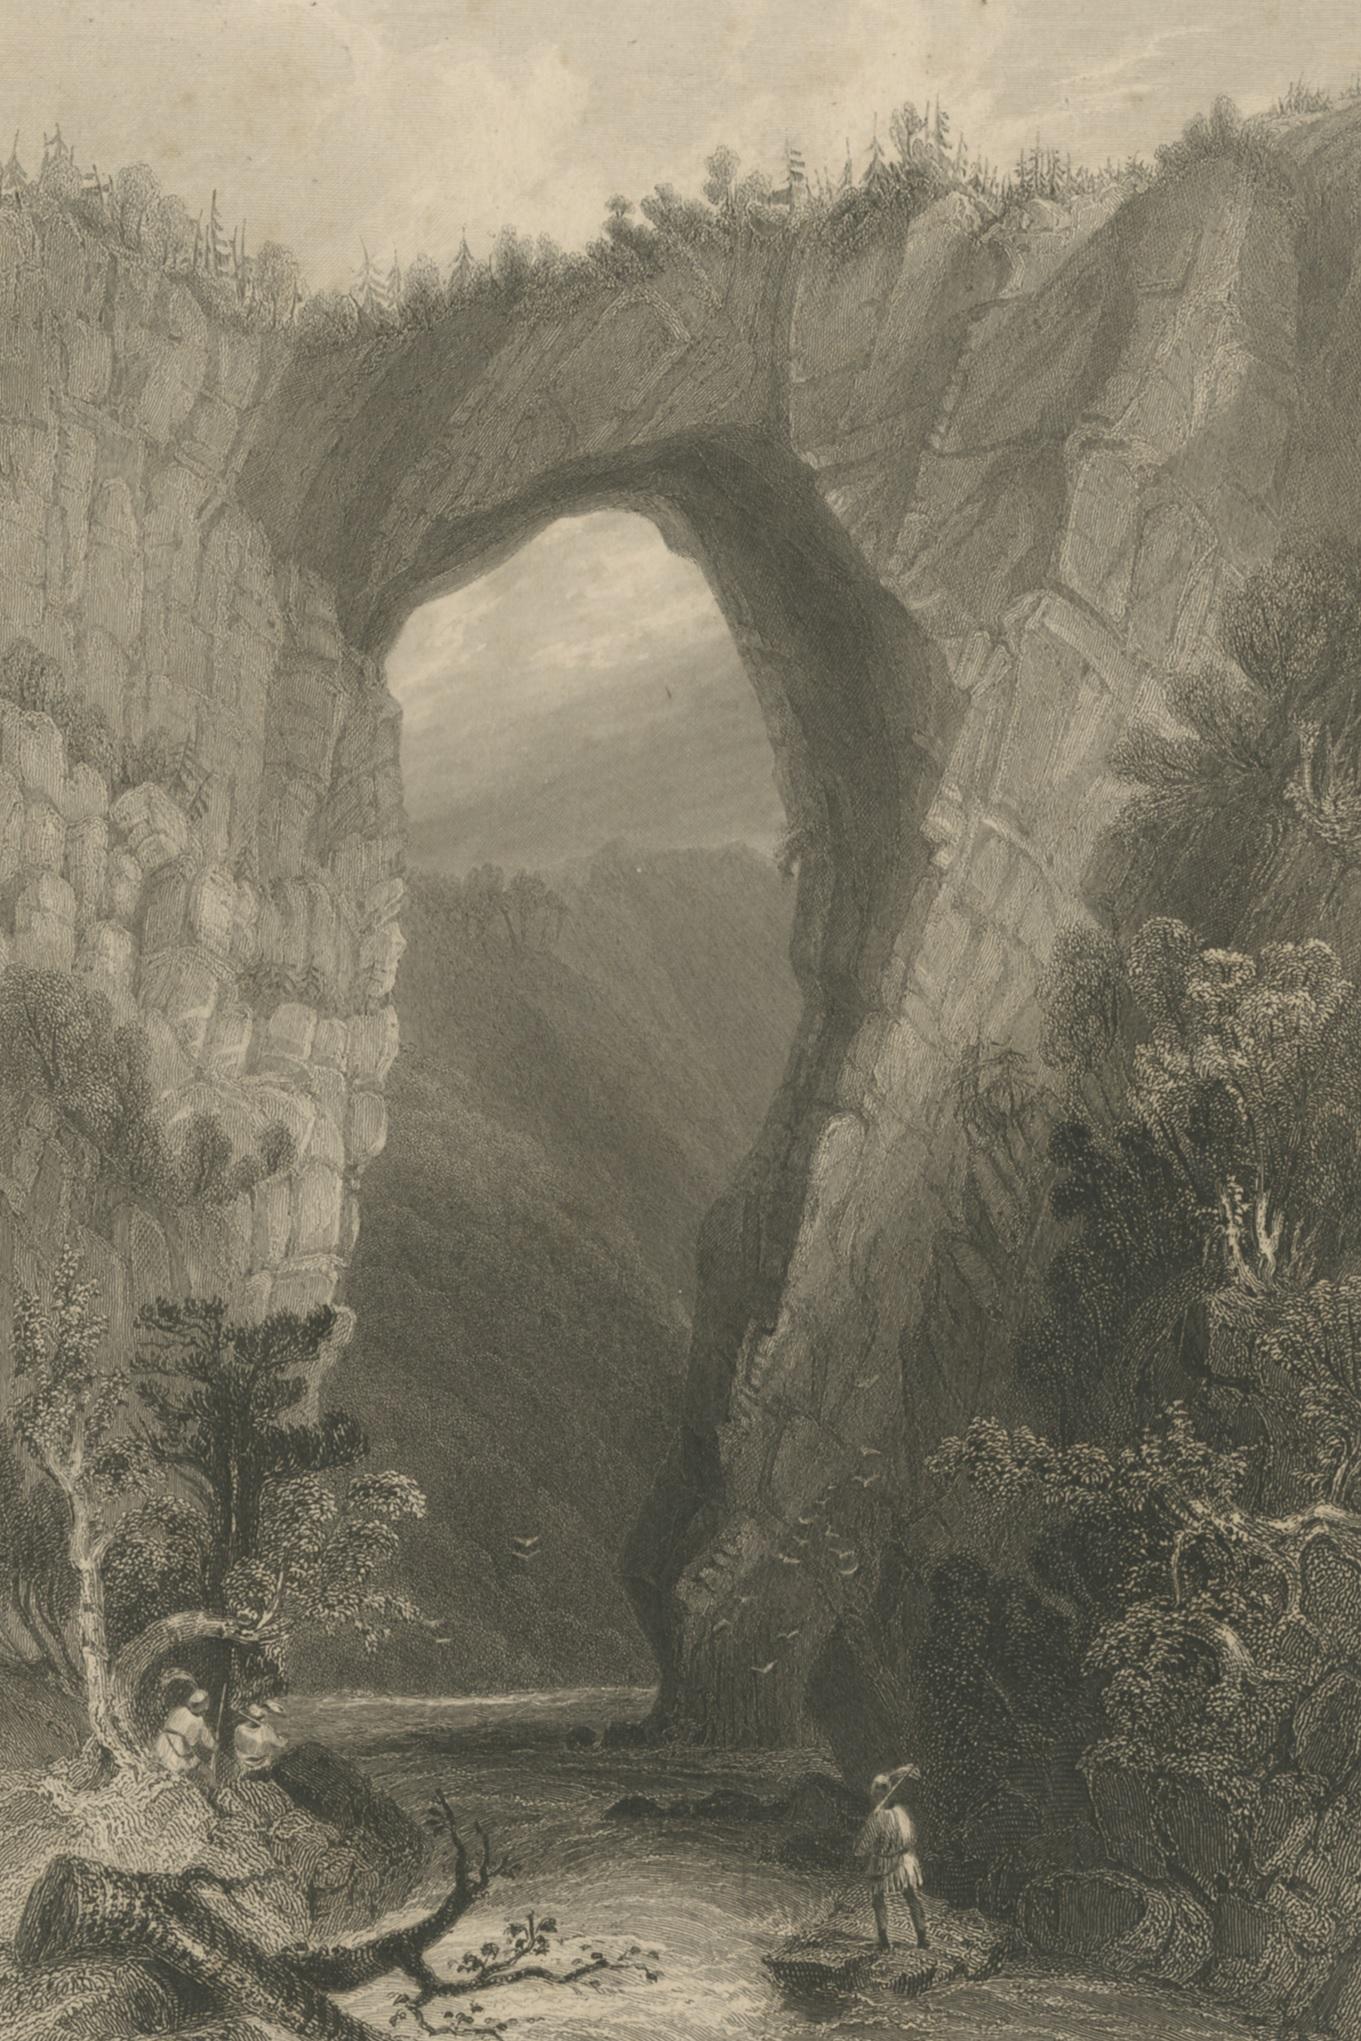 Antique print titled 'Natural Bridge, Virginia'. View of the natural bridge, a geological formation in Rockbridge County, Virginia. Published, circa 1860.